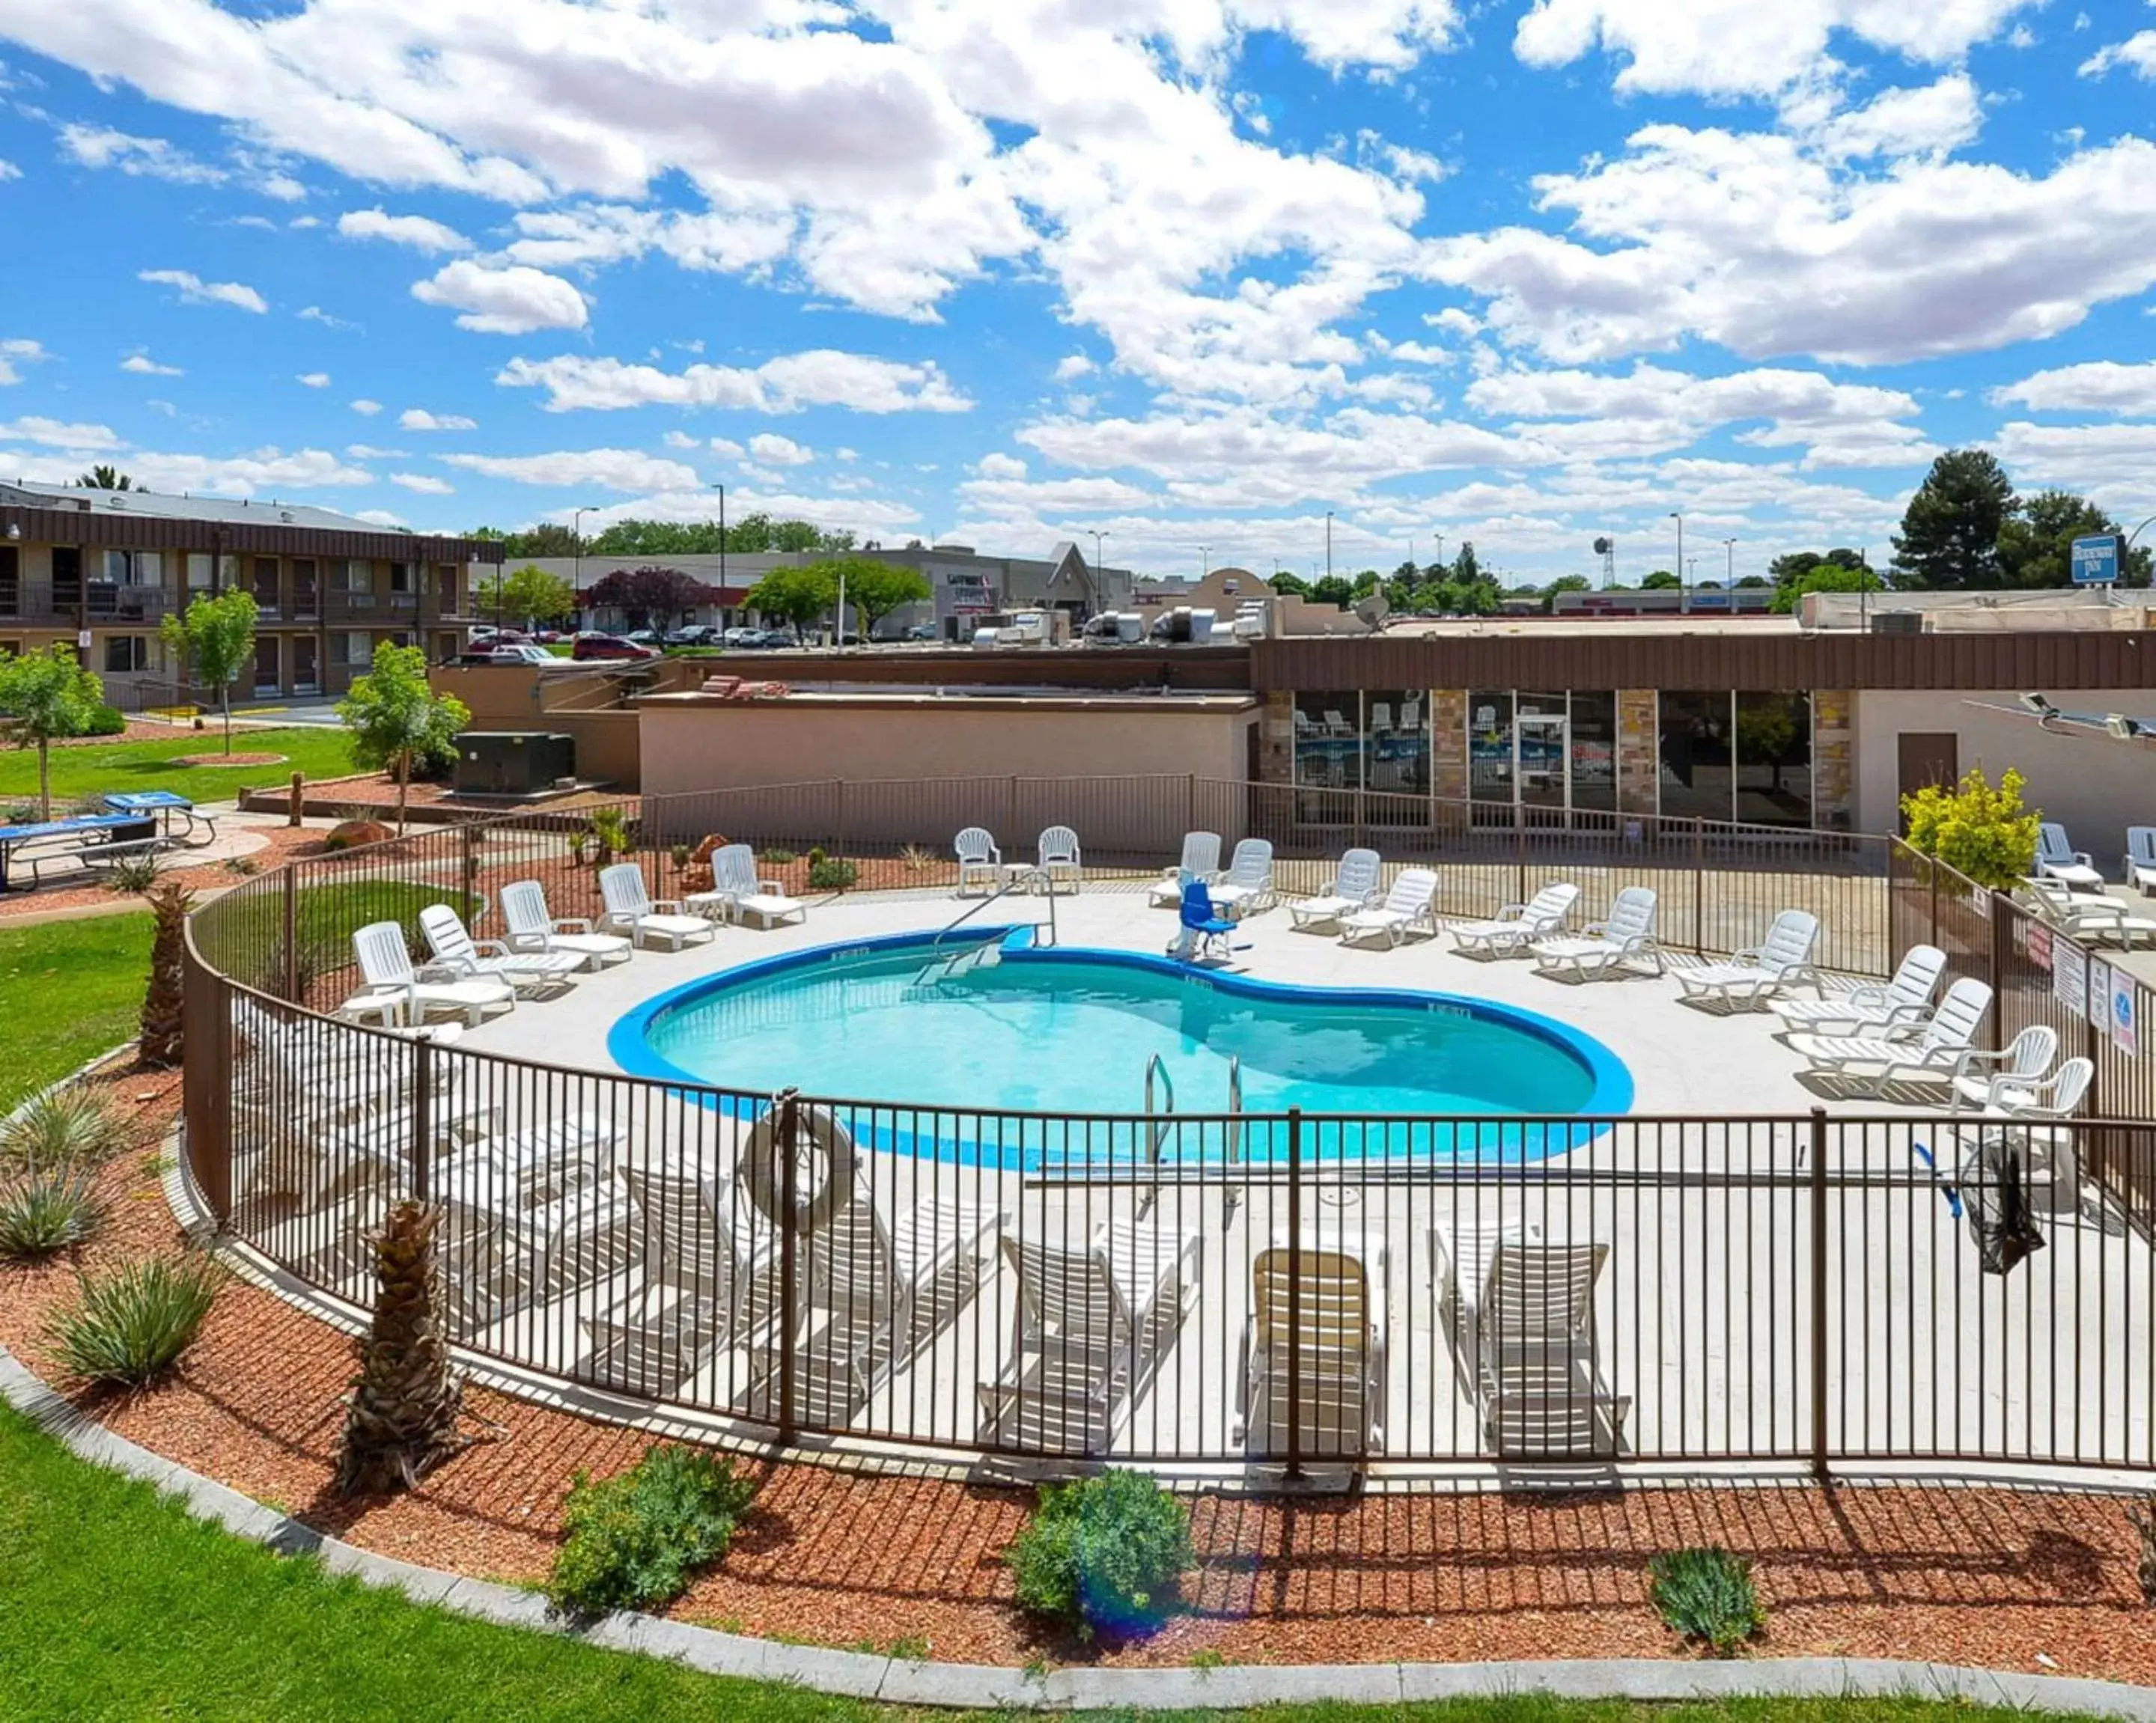 Property building, Pool View in Rodeway Inn at Lake Powell